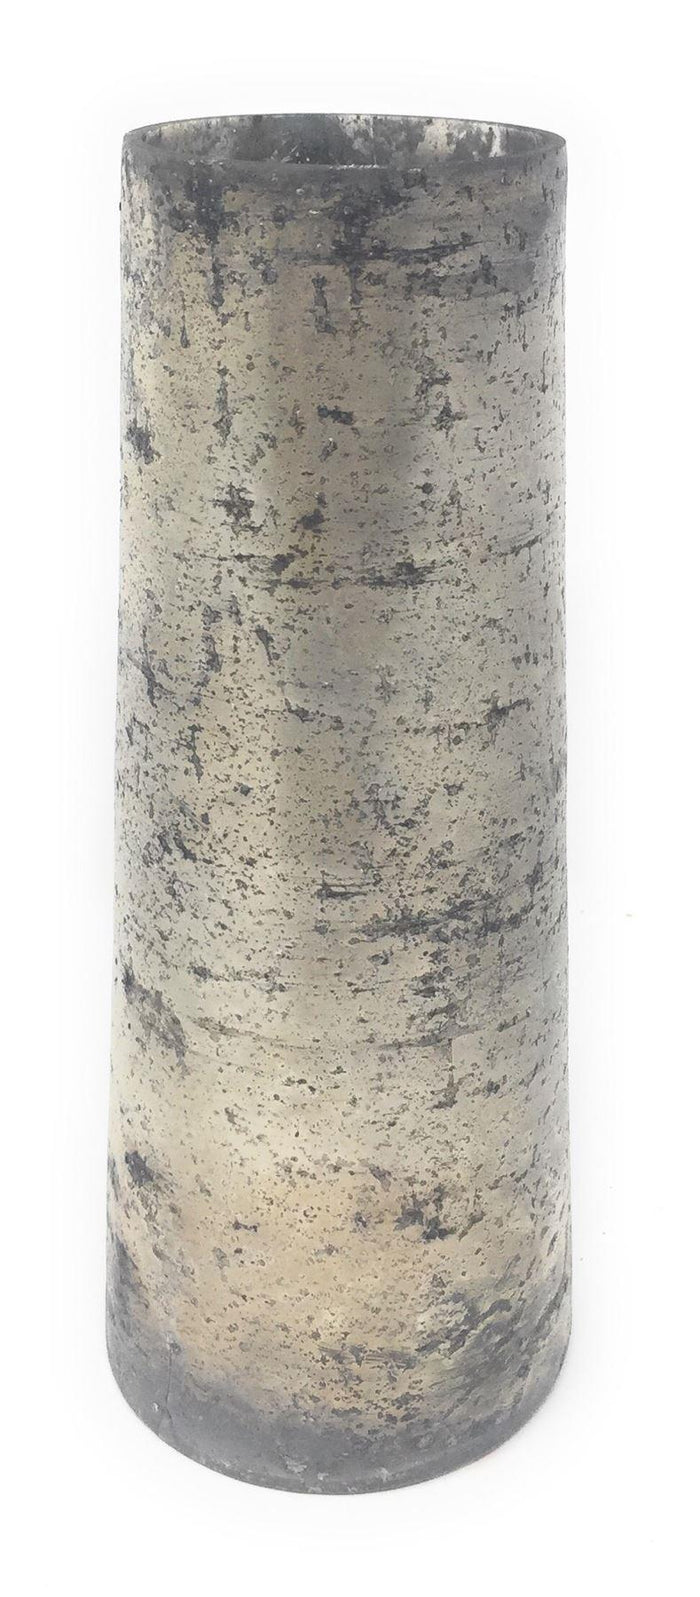 Serene Spaces Living Vintage Style Pewter Bud Vase, Tapered Glass Vase, Measures 7.75" Tall and 3" Diameter, Sold Individually and in Set of 4